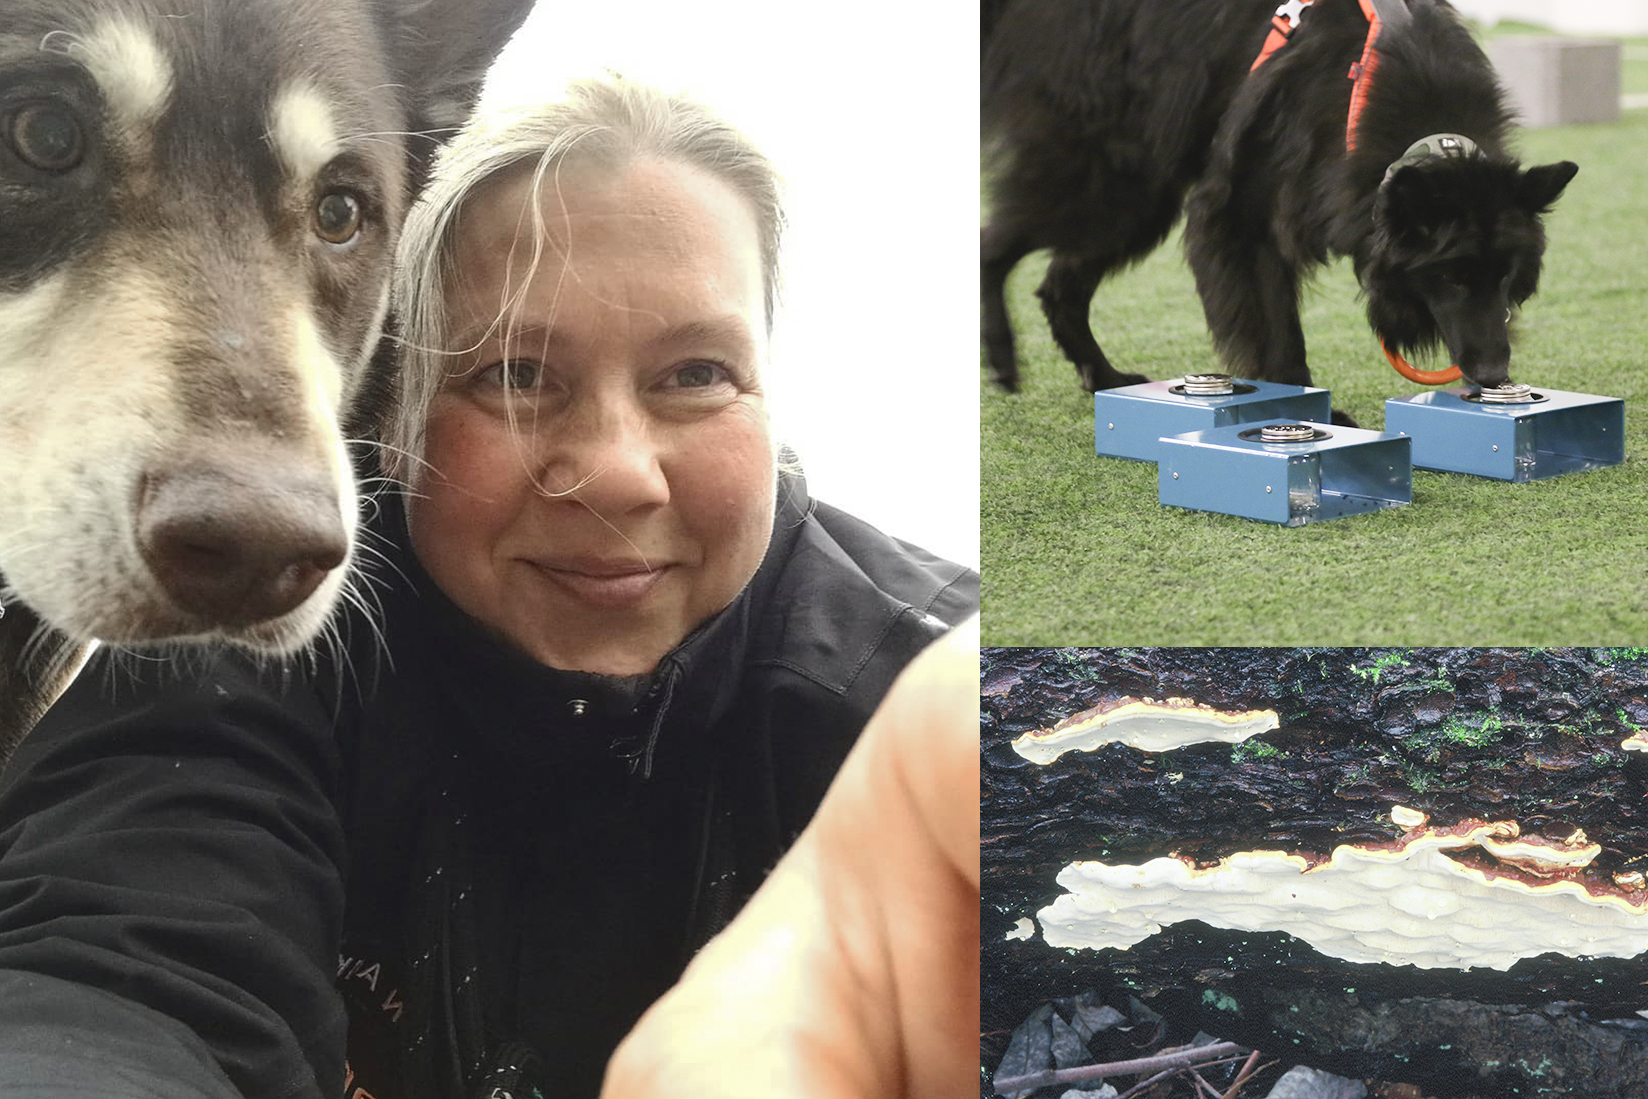 Dogs were trained indoors in Rovaniemi during the winter to smell Heterobasidium parviporum. The project is led by agrologist Sanna Vinblad from Lapland University of Applied Sciences. Photos: Sanna Vinblad / Lapland University of Applied Sciences and UPM